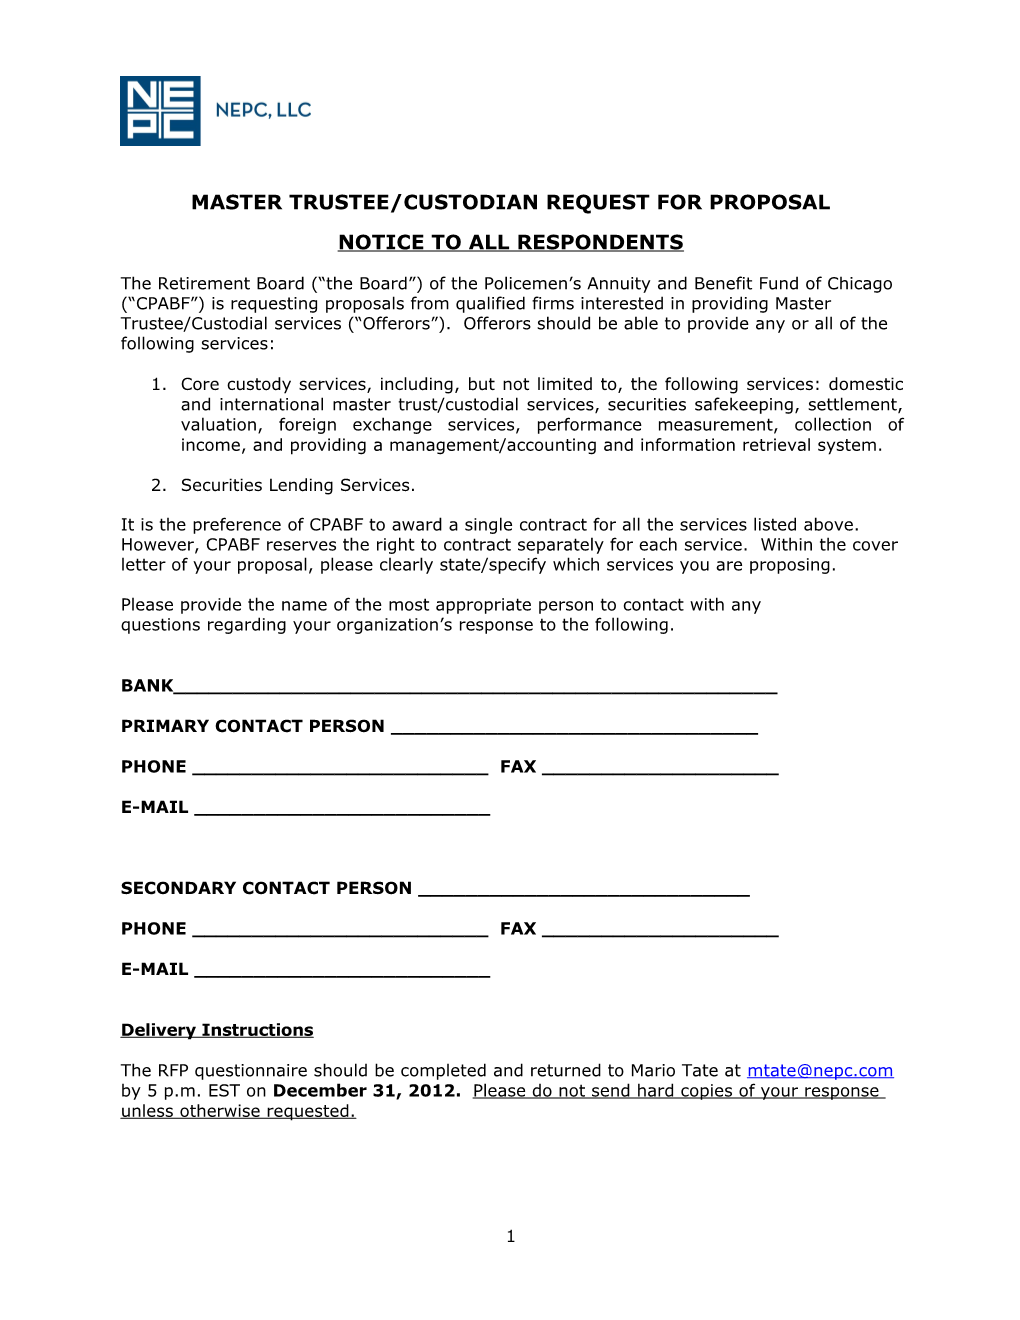 Master Trustee/Custodian Request for Proposal